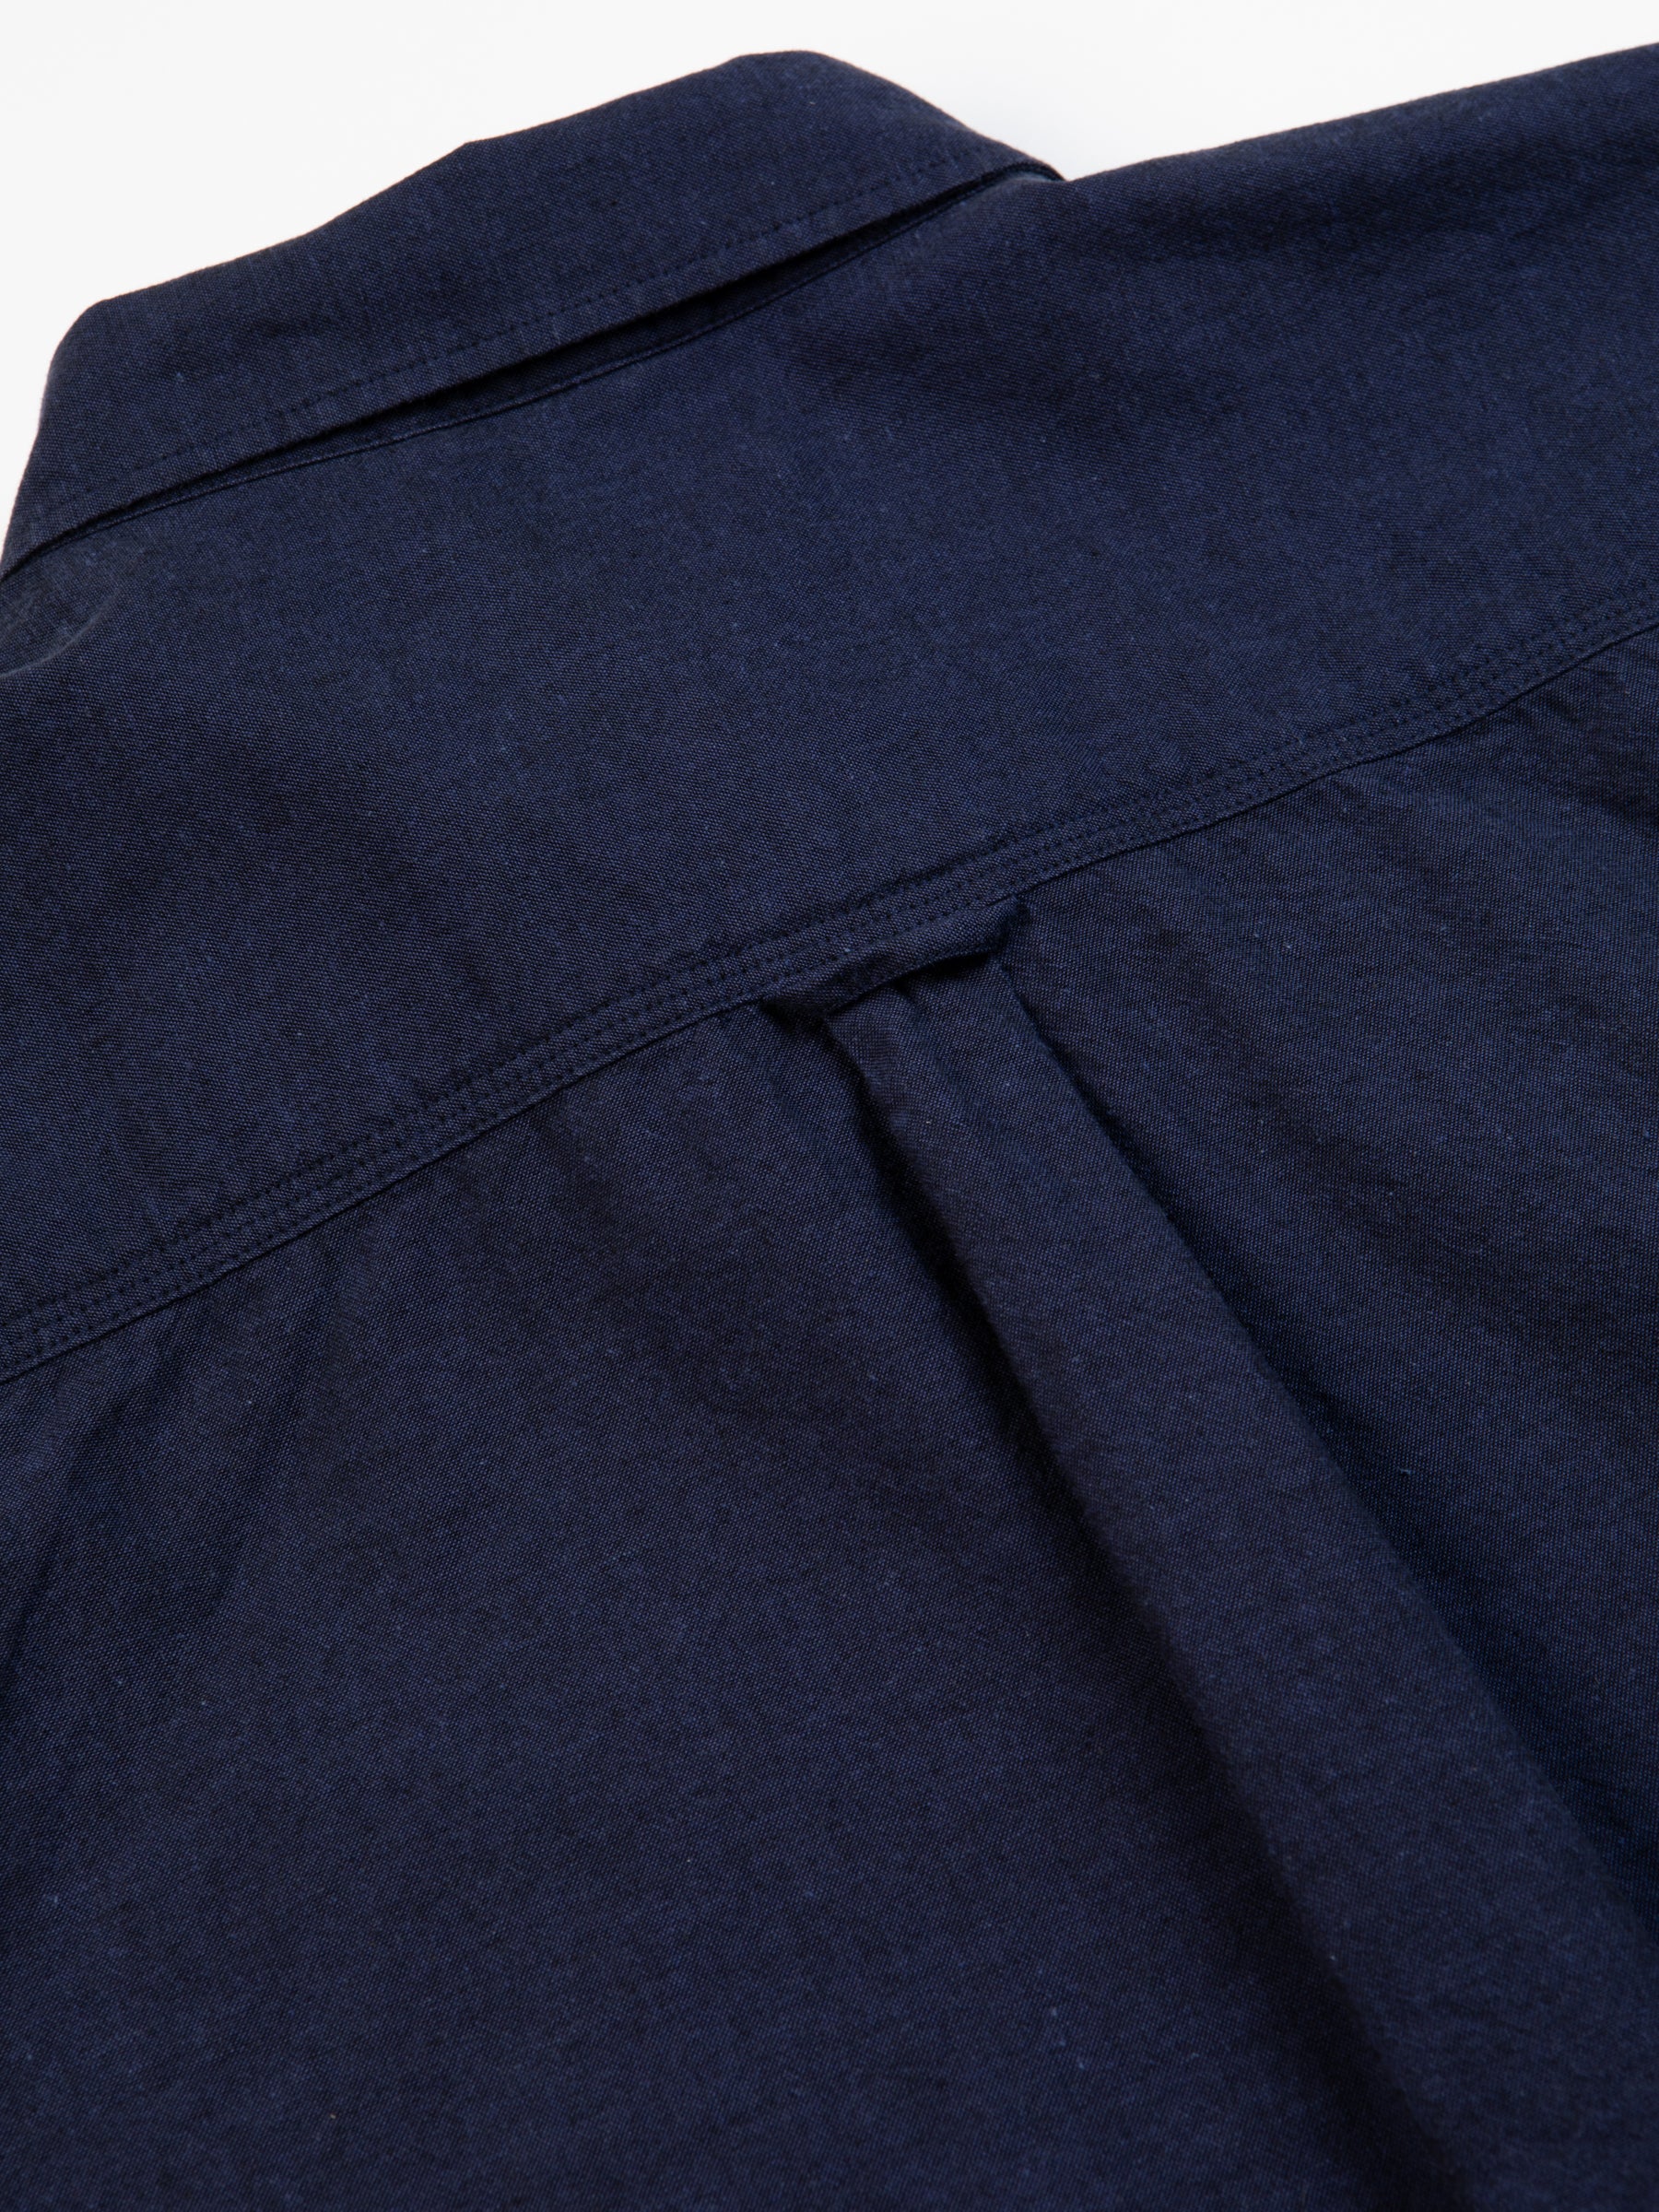 The pleated back of a men's Oxford Shirt by designer menswear brand KESTIN.